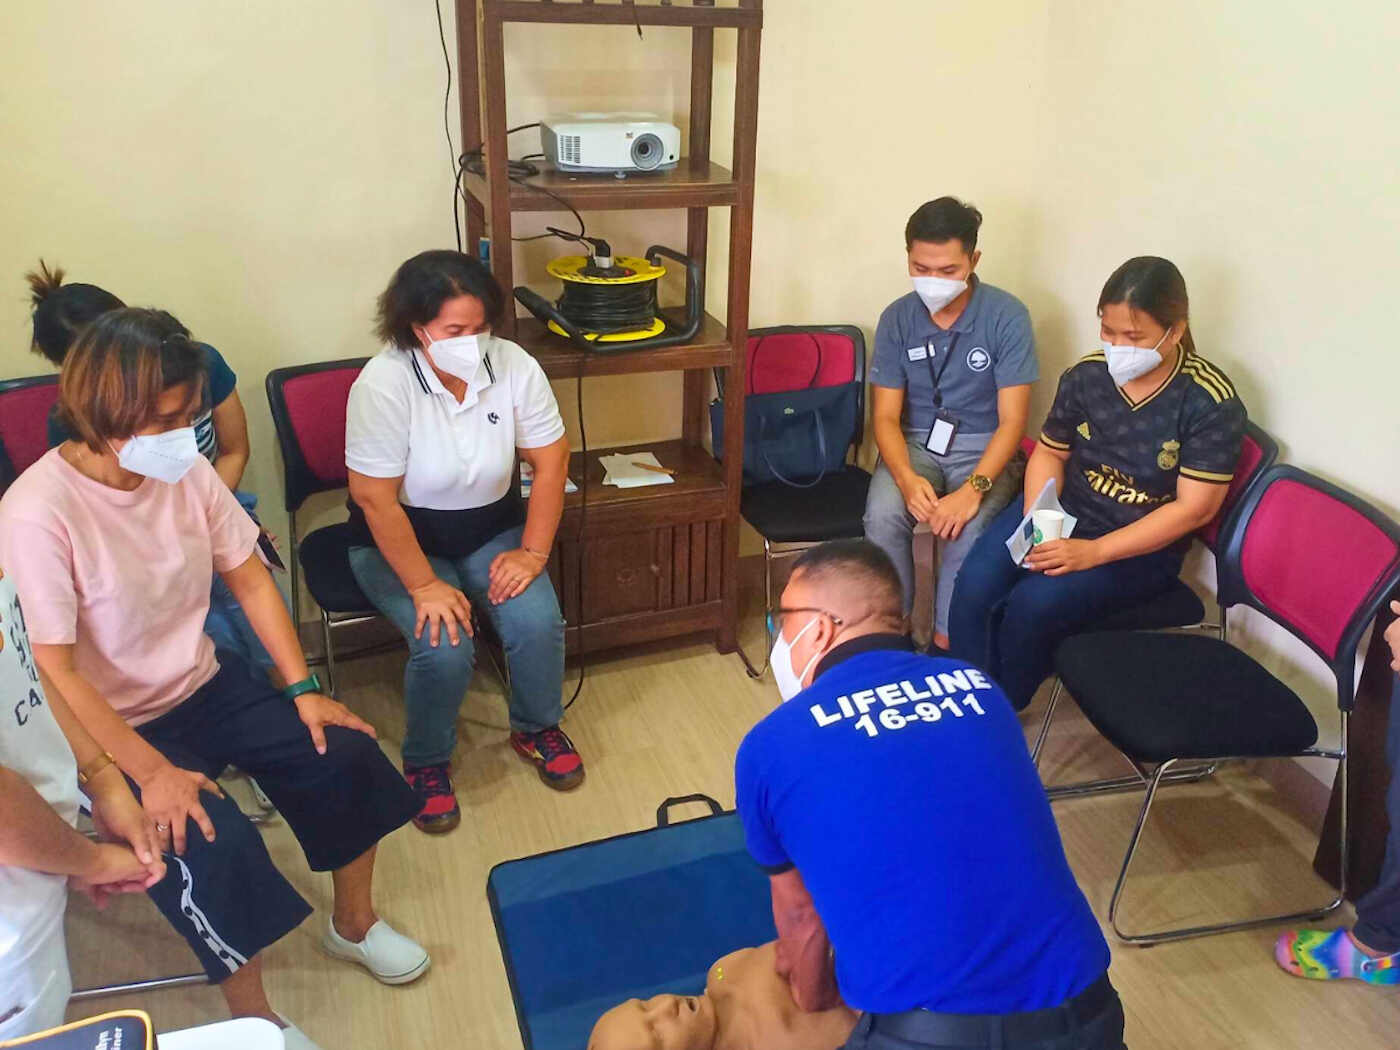 RainTree Care’s Successful Basic Life Support Training with Lifeline 16911